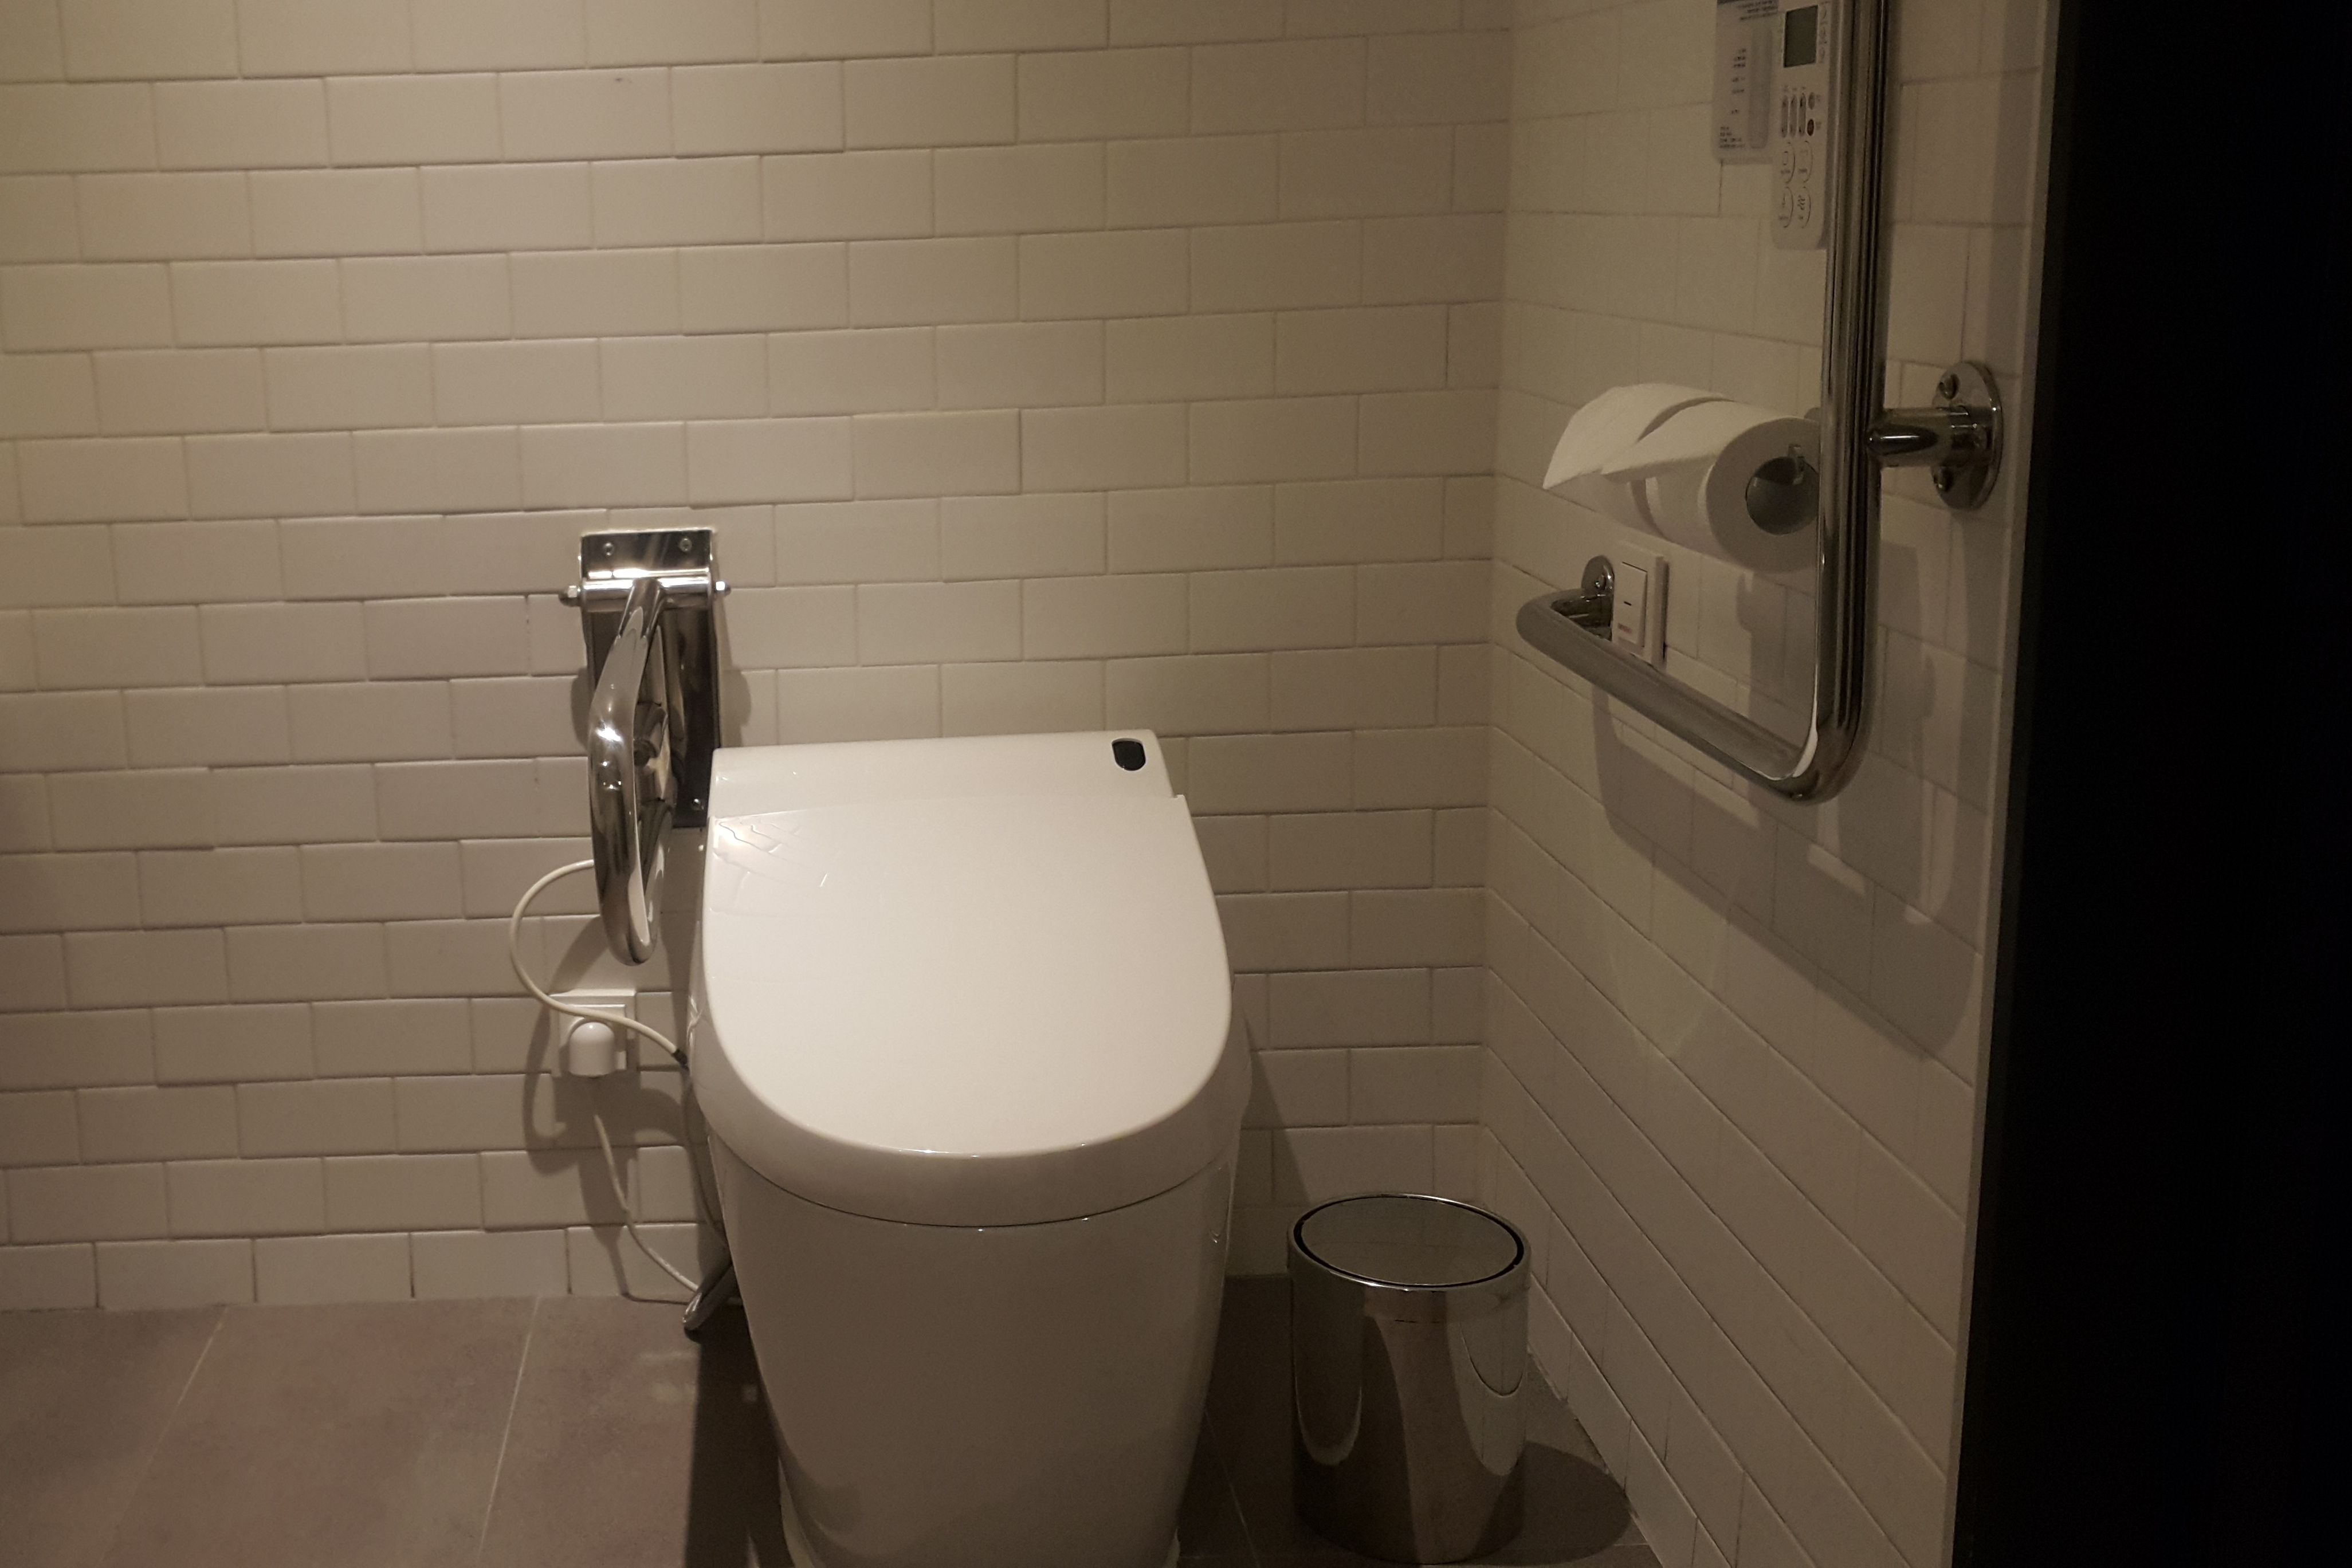 Bathroom  0 : Restrooms of the GLAD Hotel Yeouido equipped with toilet grab bars
